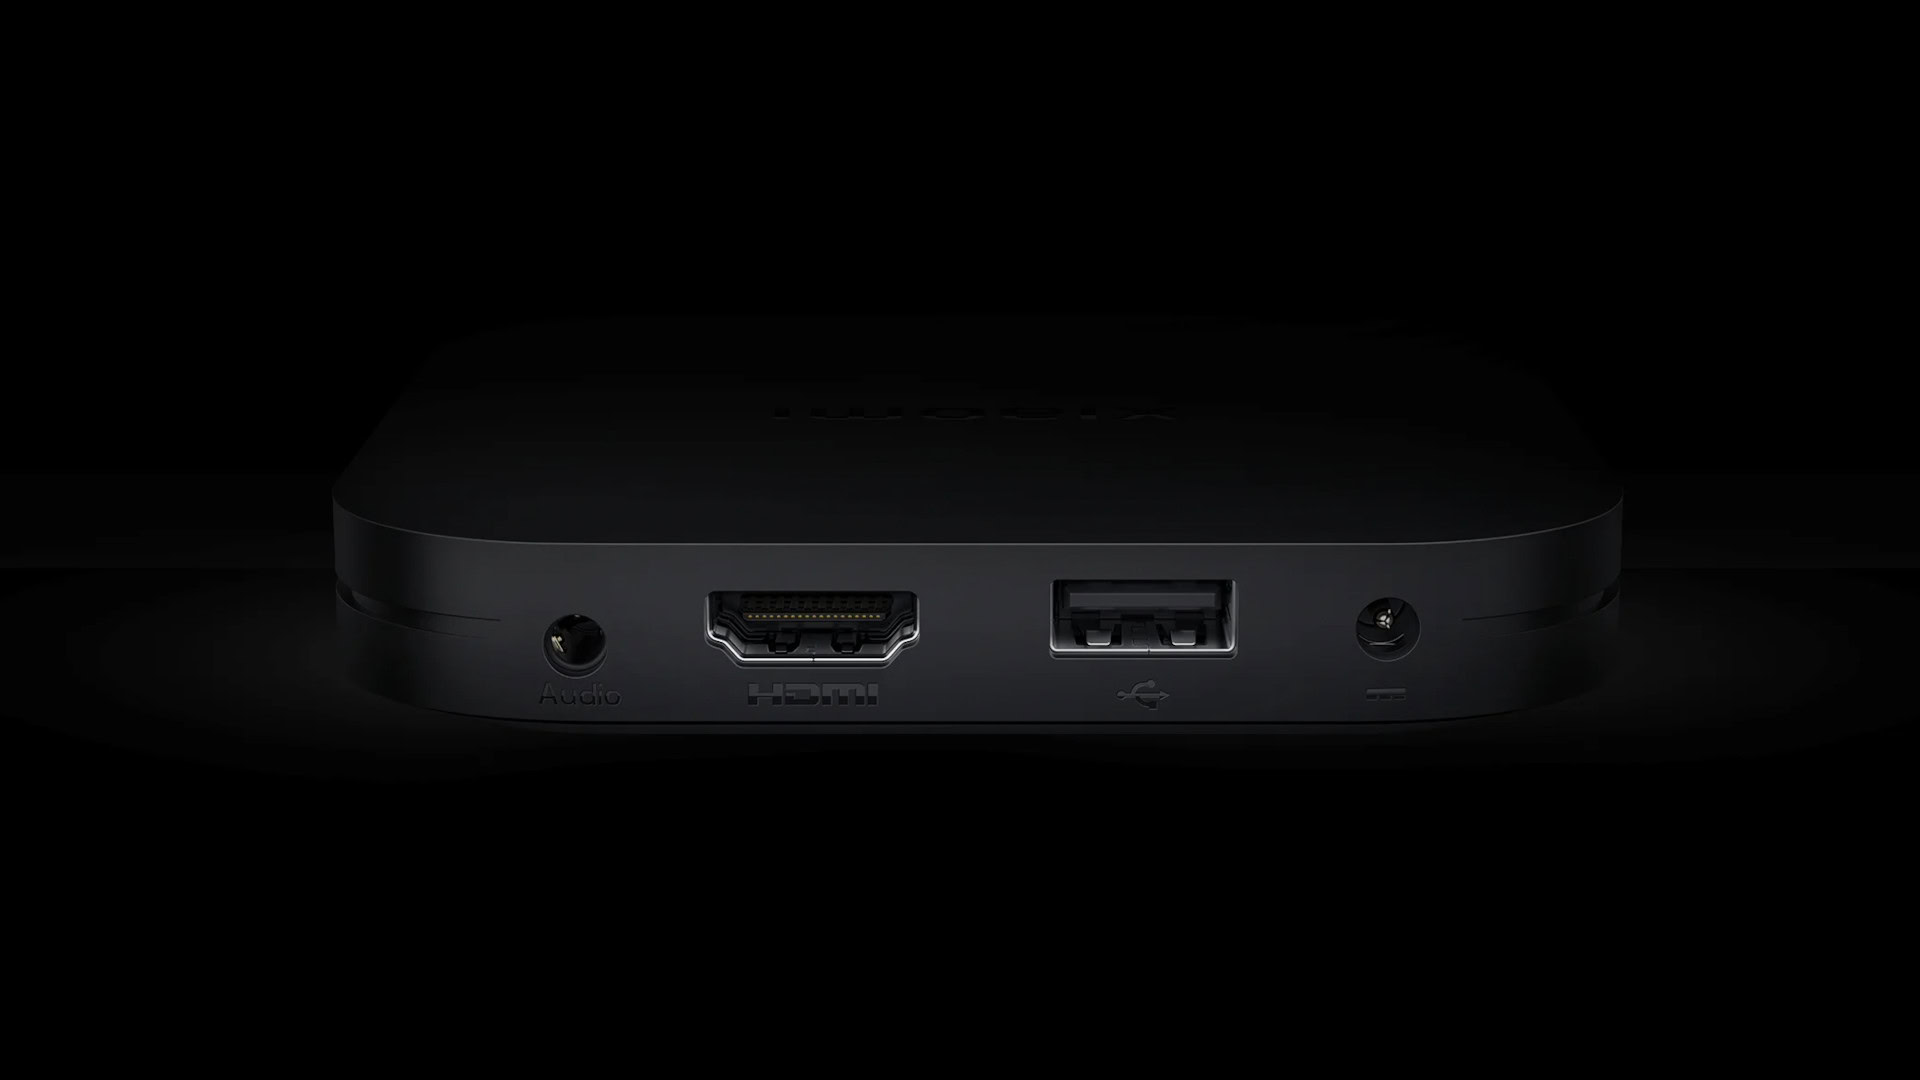 Xiaomi's next Mi Box could launch globally soon - Android Authority